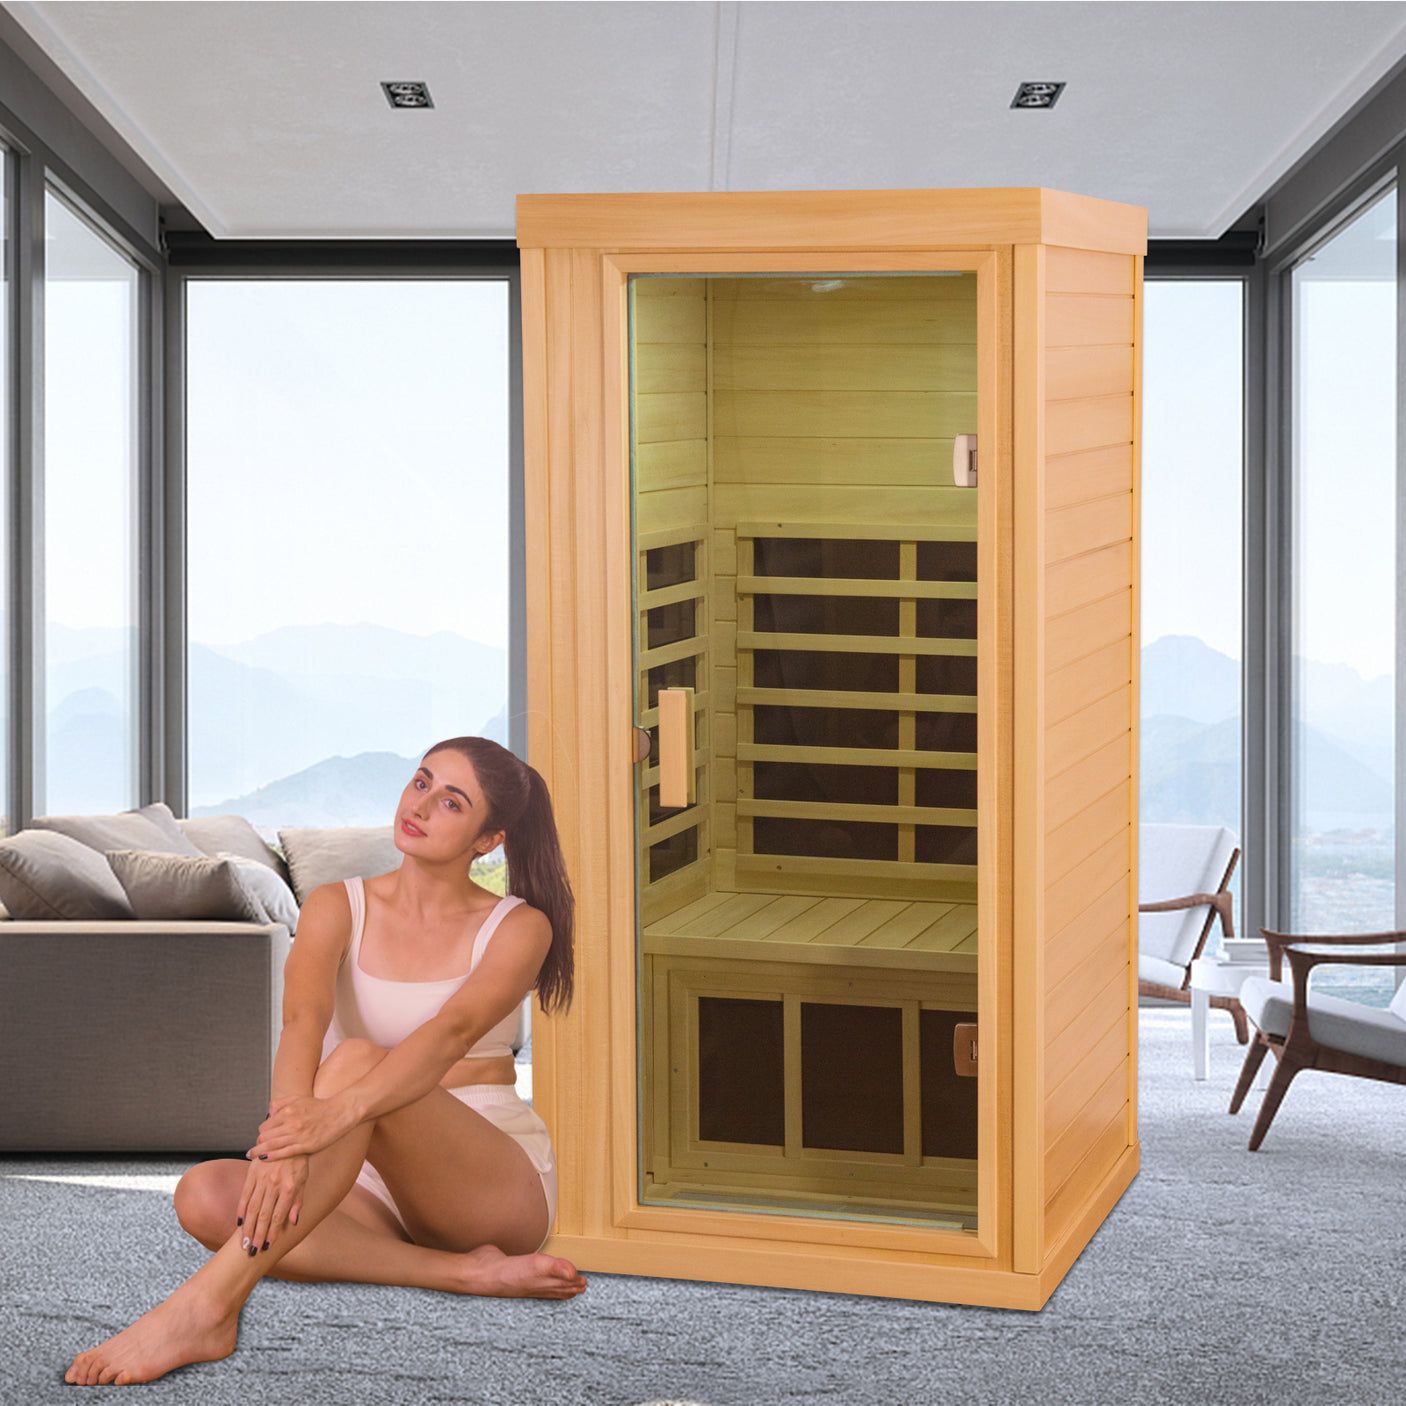 Sauna for one person